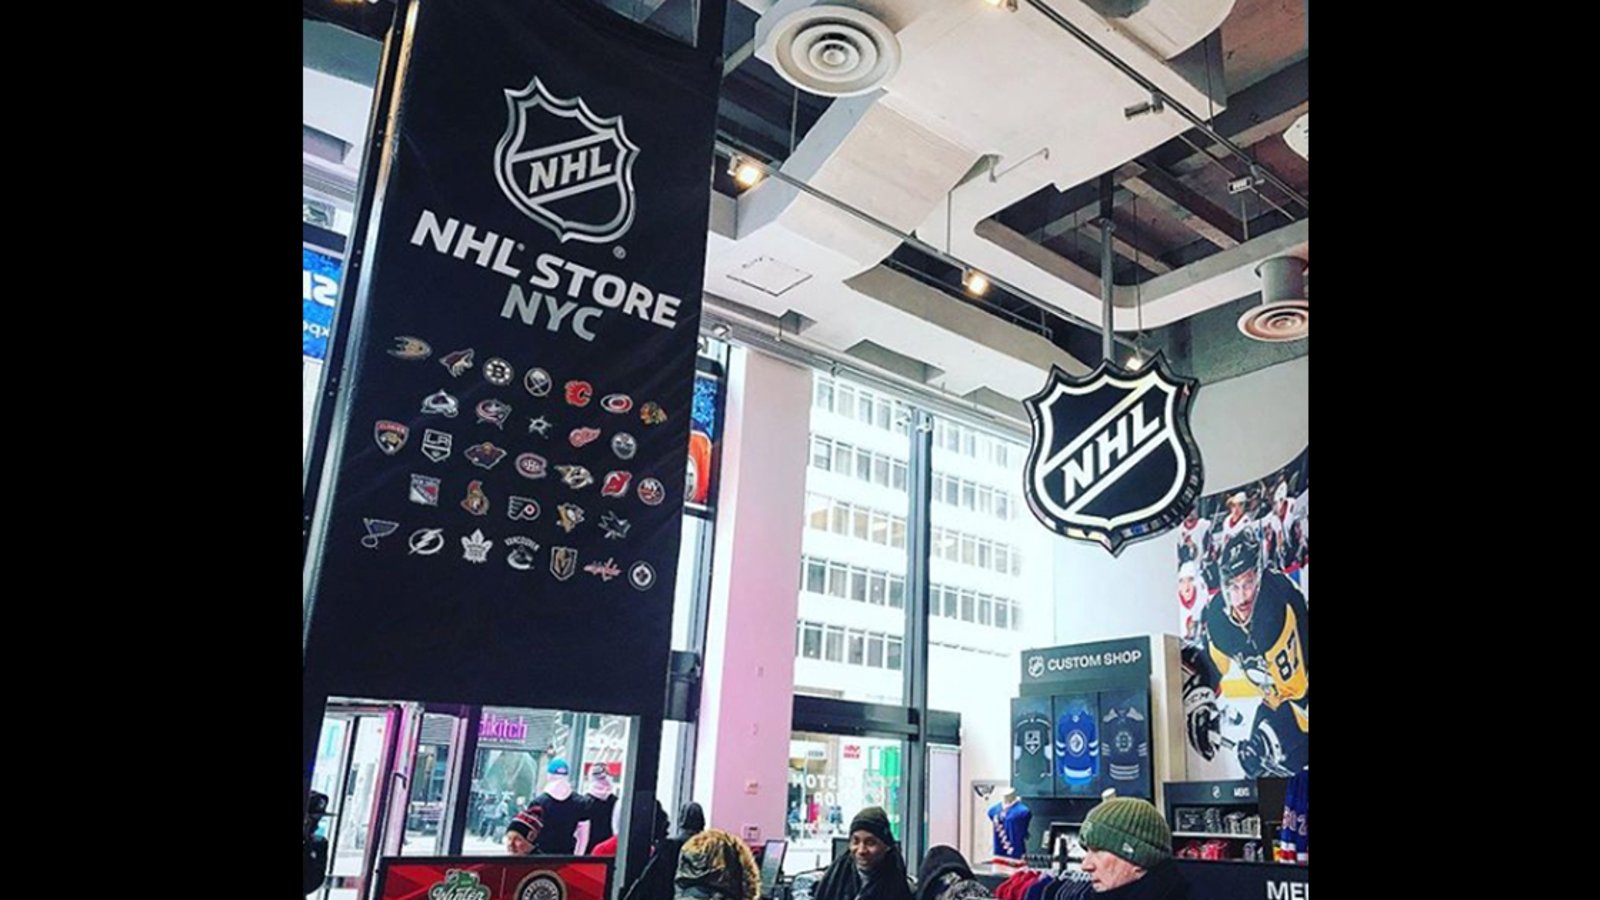 Rumor: New logo/jersey coming for Canadian NHL team?